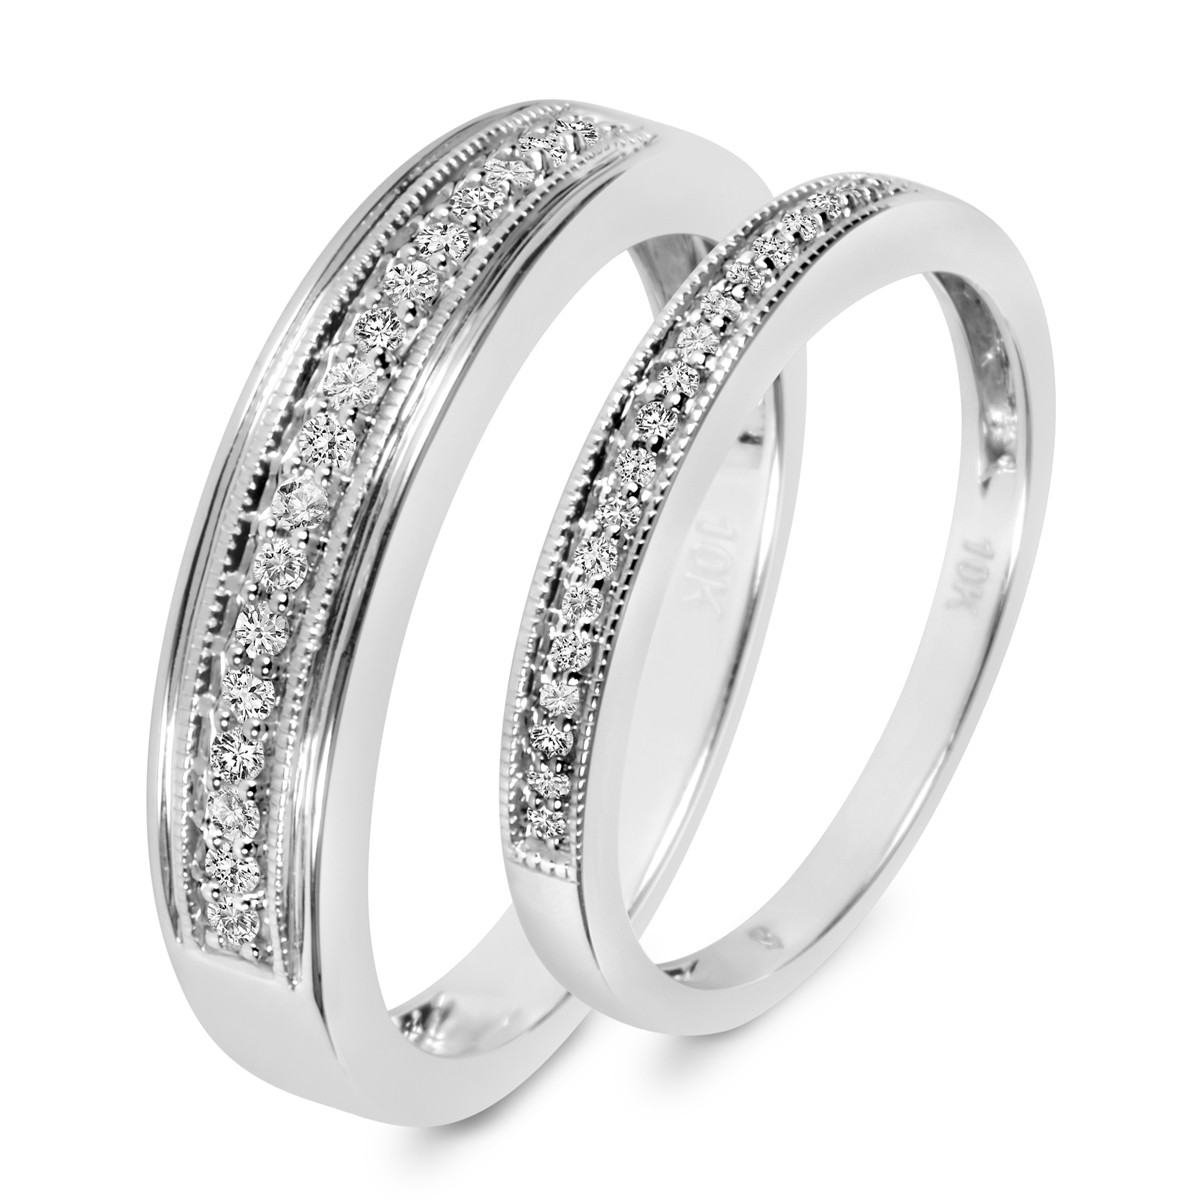 White Gold Wedding Ring Sets His And Hers
 1 4 CT T W Diamond His And Hers Wedding Band Set 14K